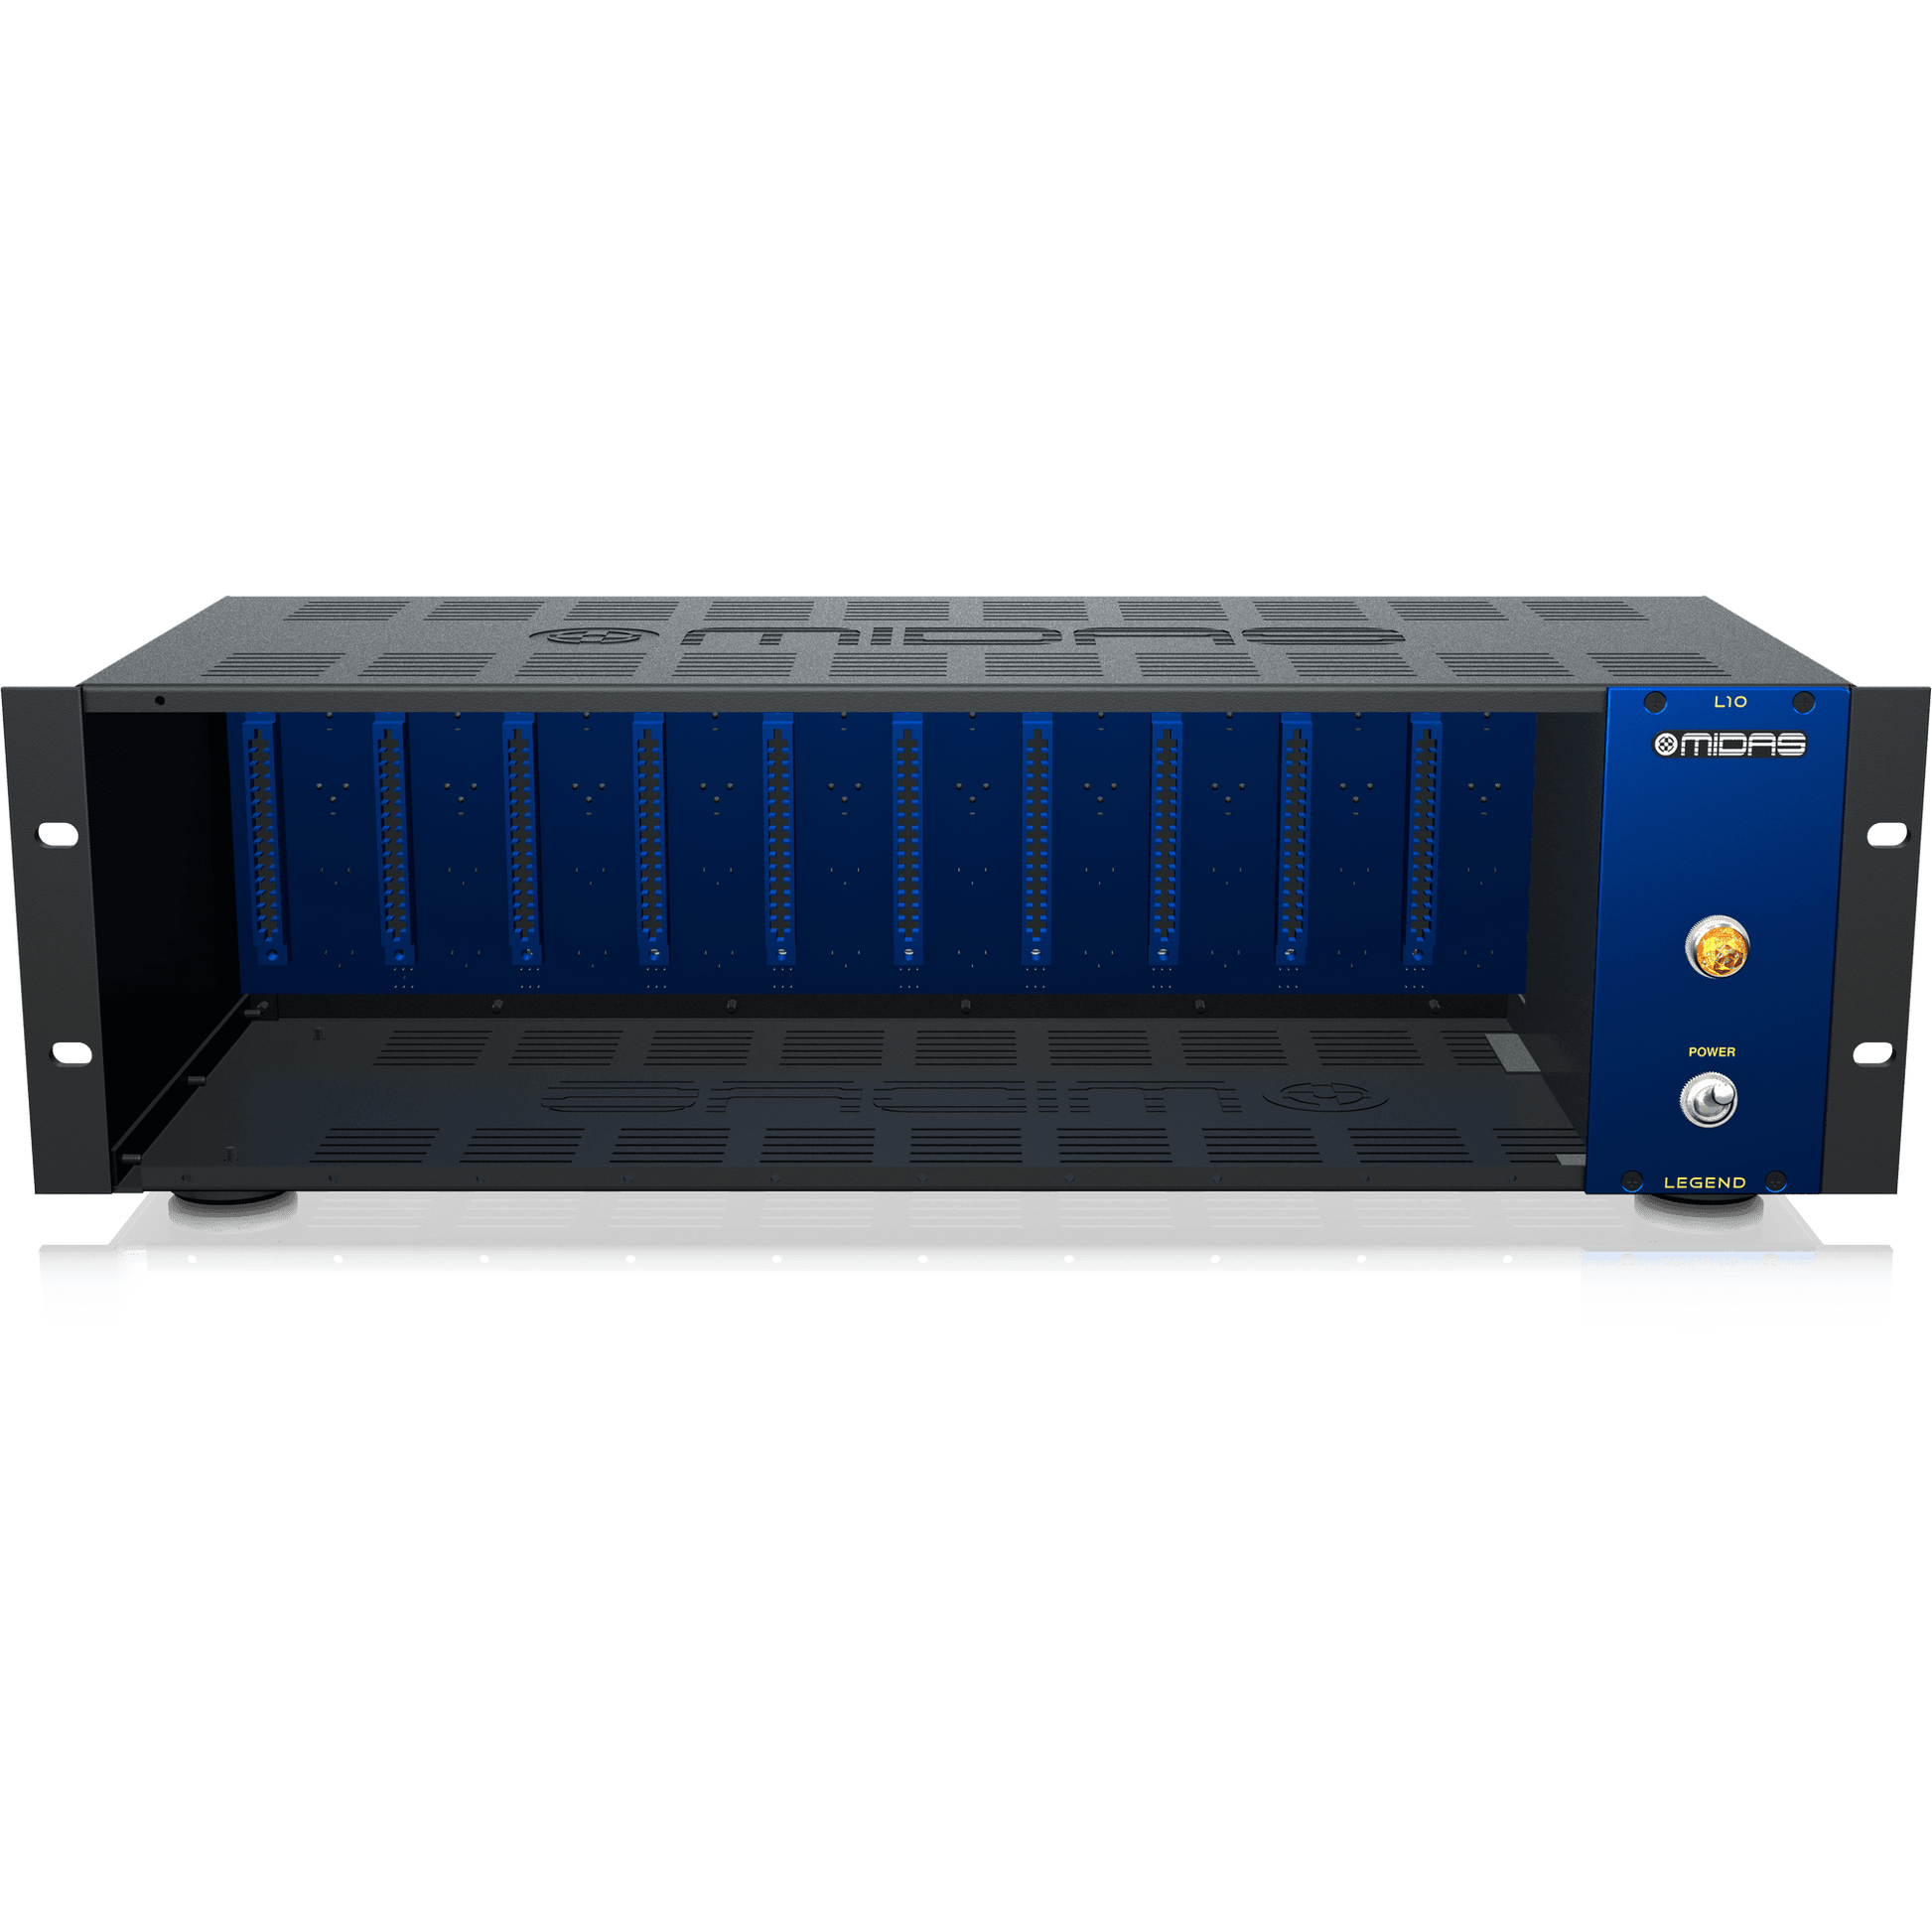 Midas L10 00 Series Rackmount Chassis for 10 Modules with Advanced Audio Routing